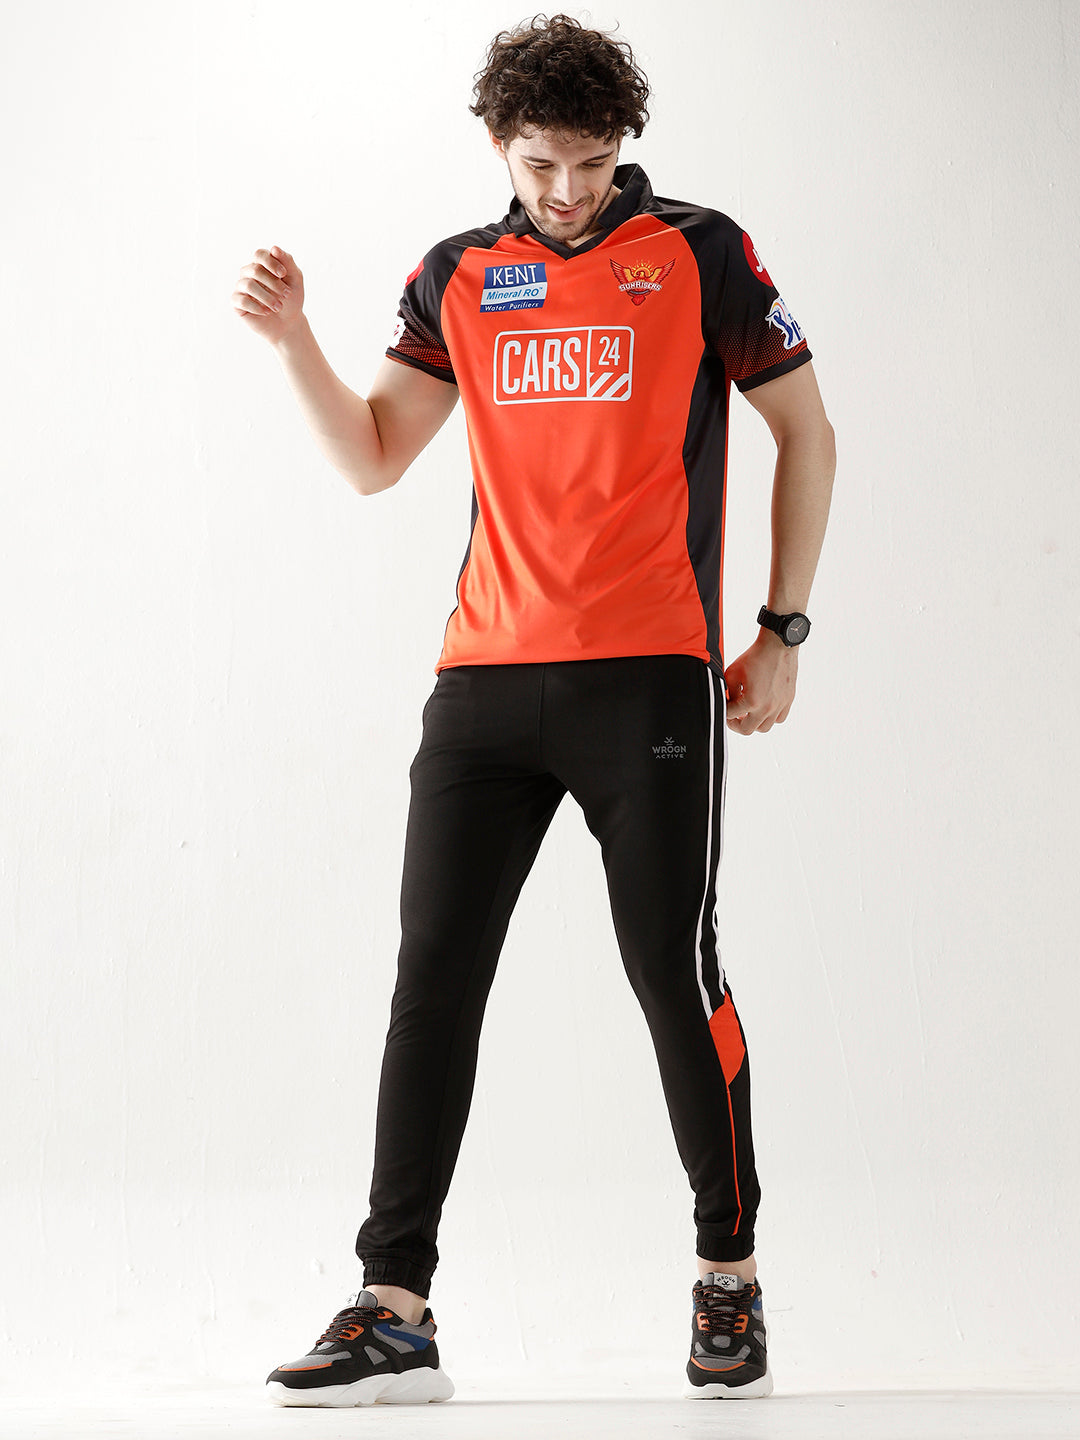 Sunrisers Hyderabad Official Jersey